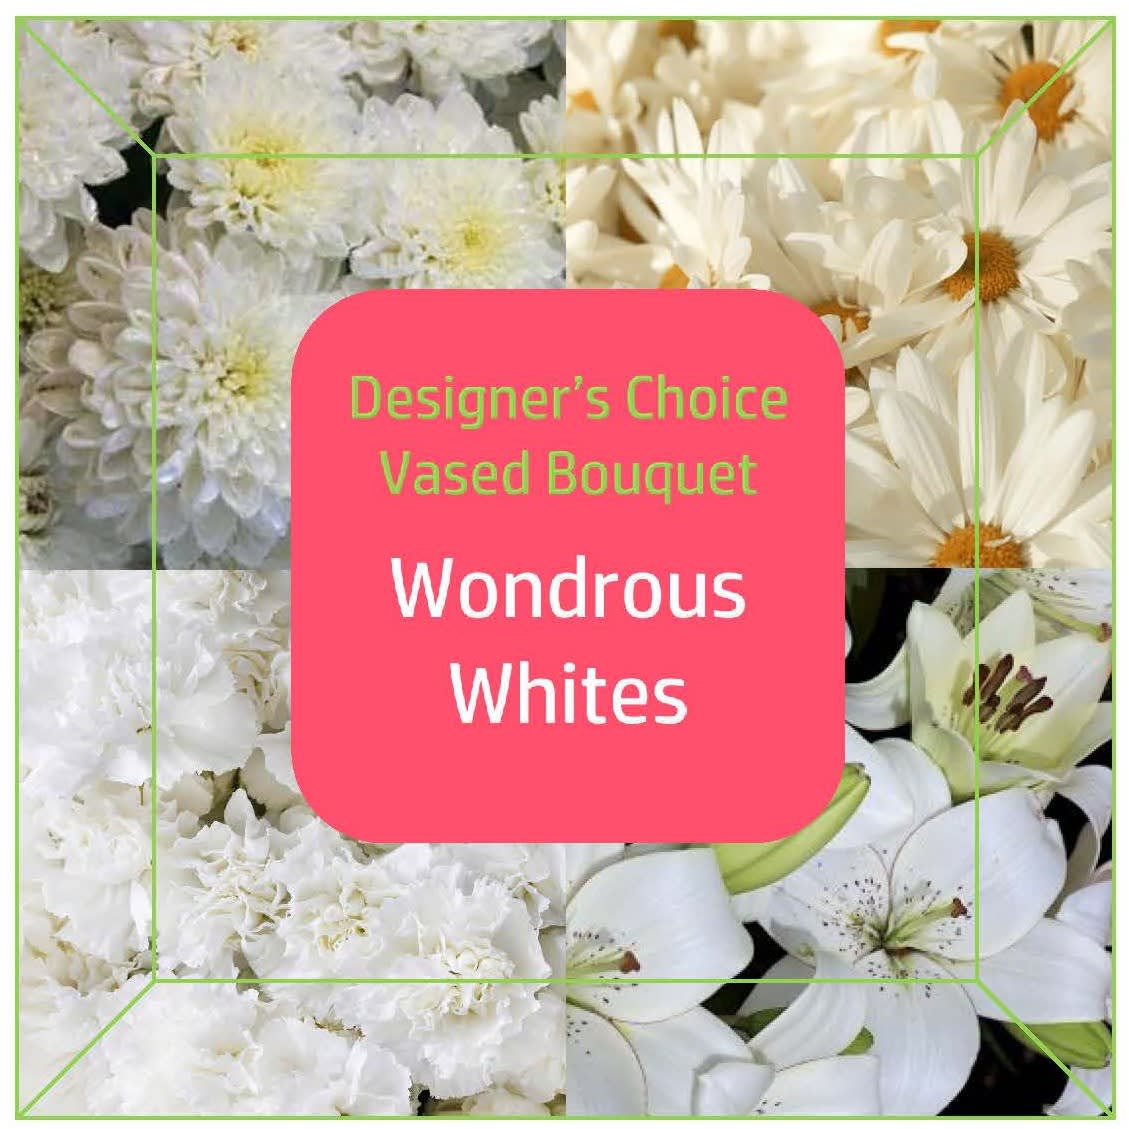 Designer's Choice (Vased) Wondrous Whites - Send a made-on-the-spot fresh floral bouquet filled with wonderfully bright and pristinely white blooms! Our expert designer will hand-select the freshest of our seasonal blooms and design them into a beautiful white-themed arrangement! Sizes and colors will vary. If you want us to avoid any type of flower, please leave a note in the special instructions.